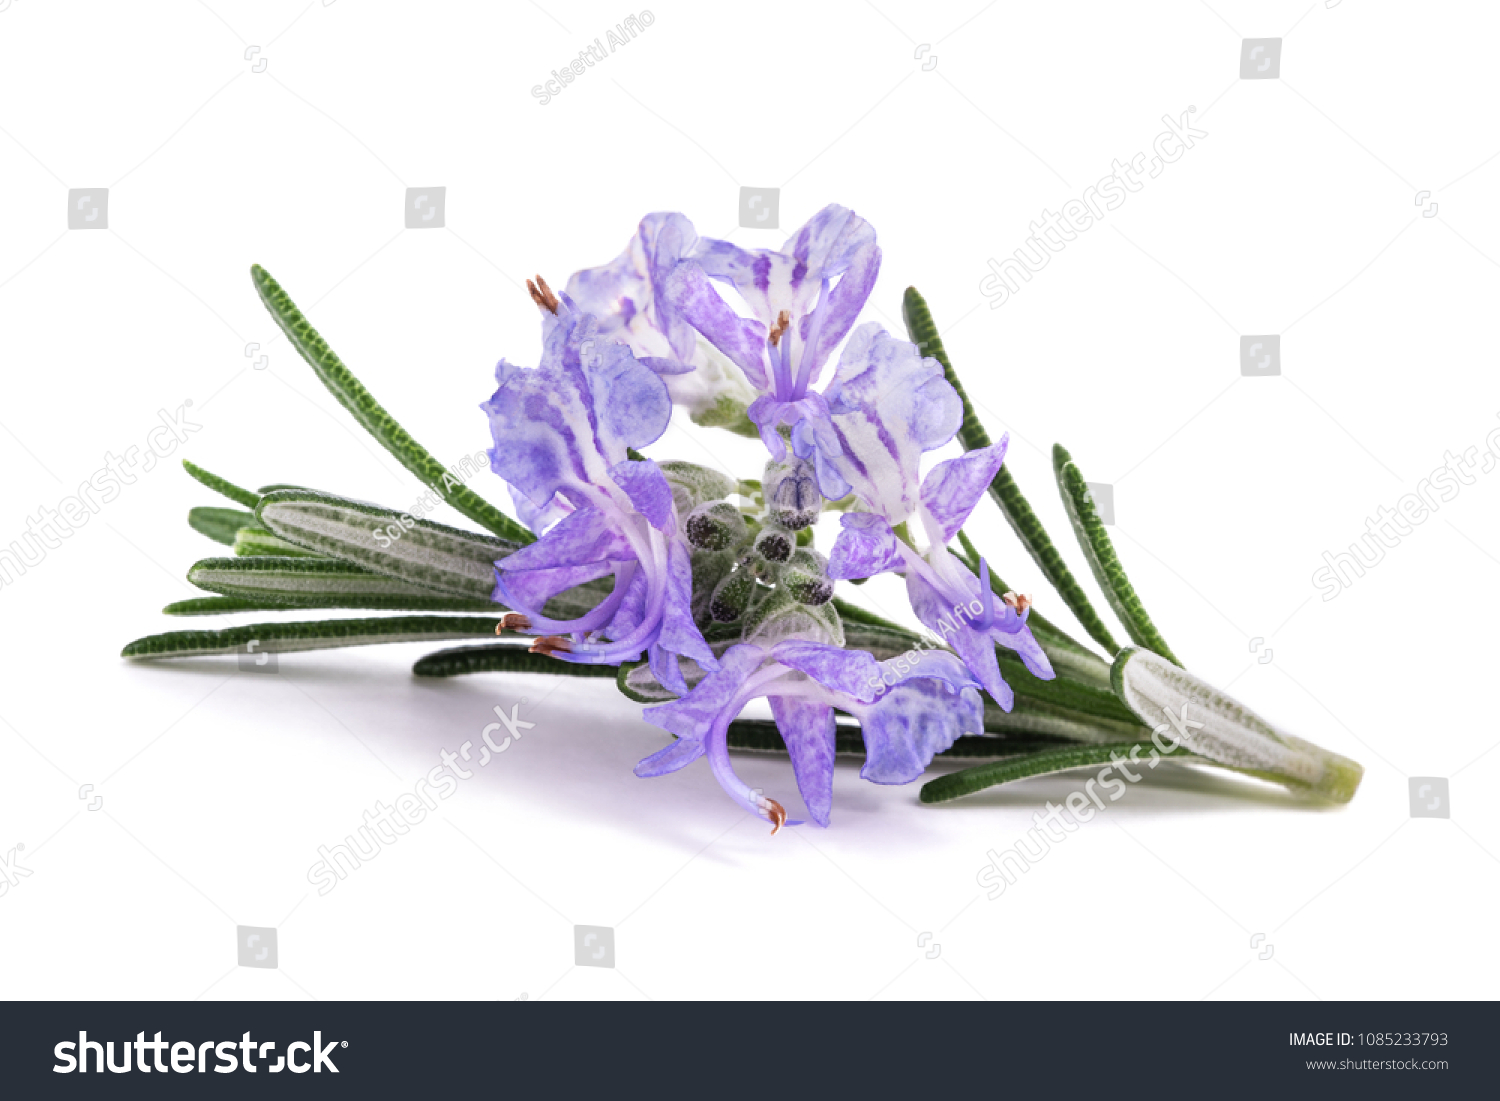 Rosemary sprig in flowers isolated on white background #1085233793